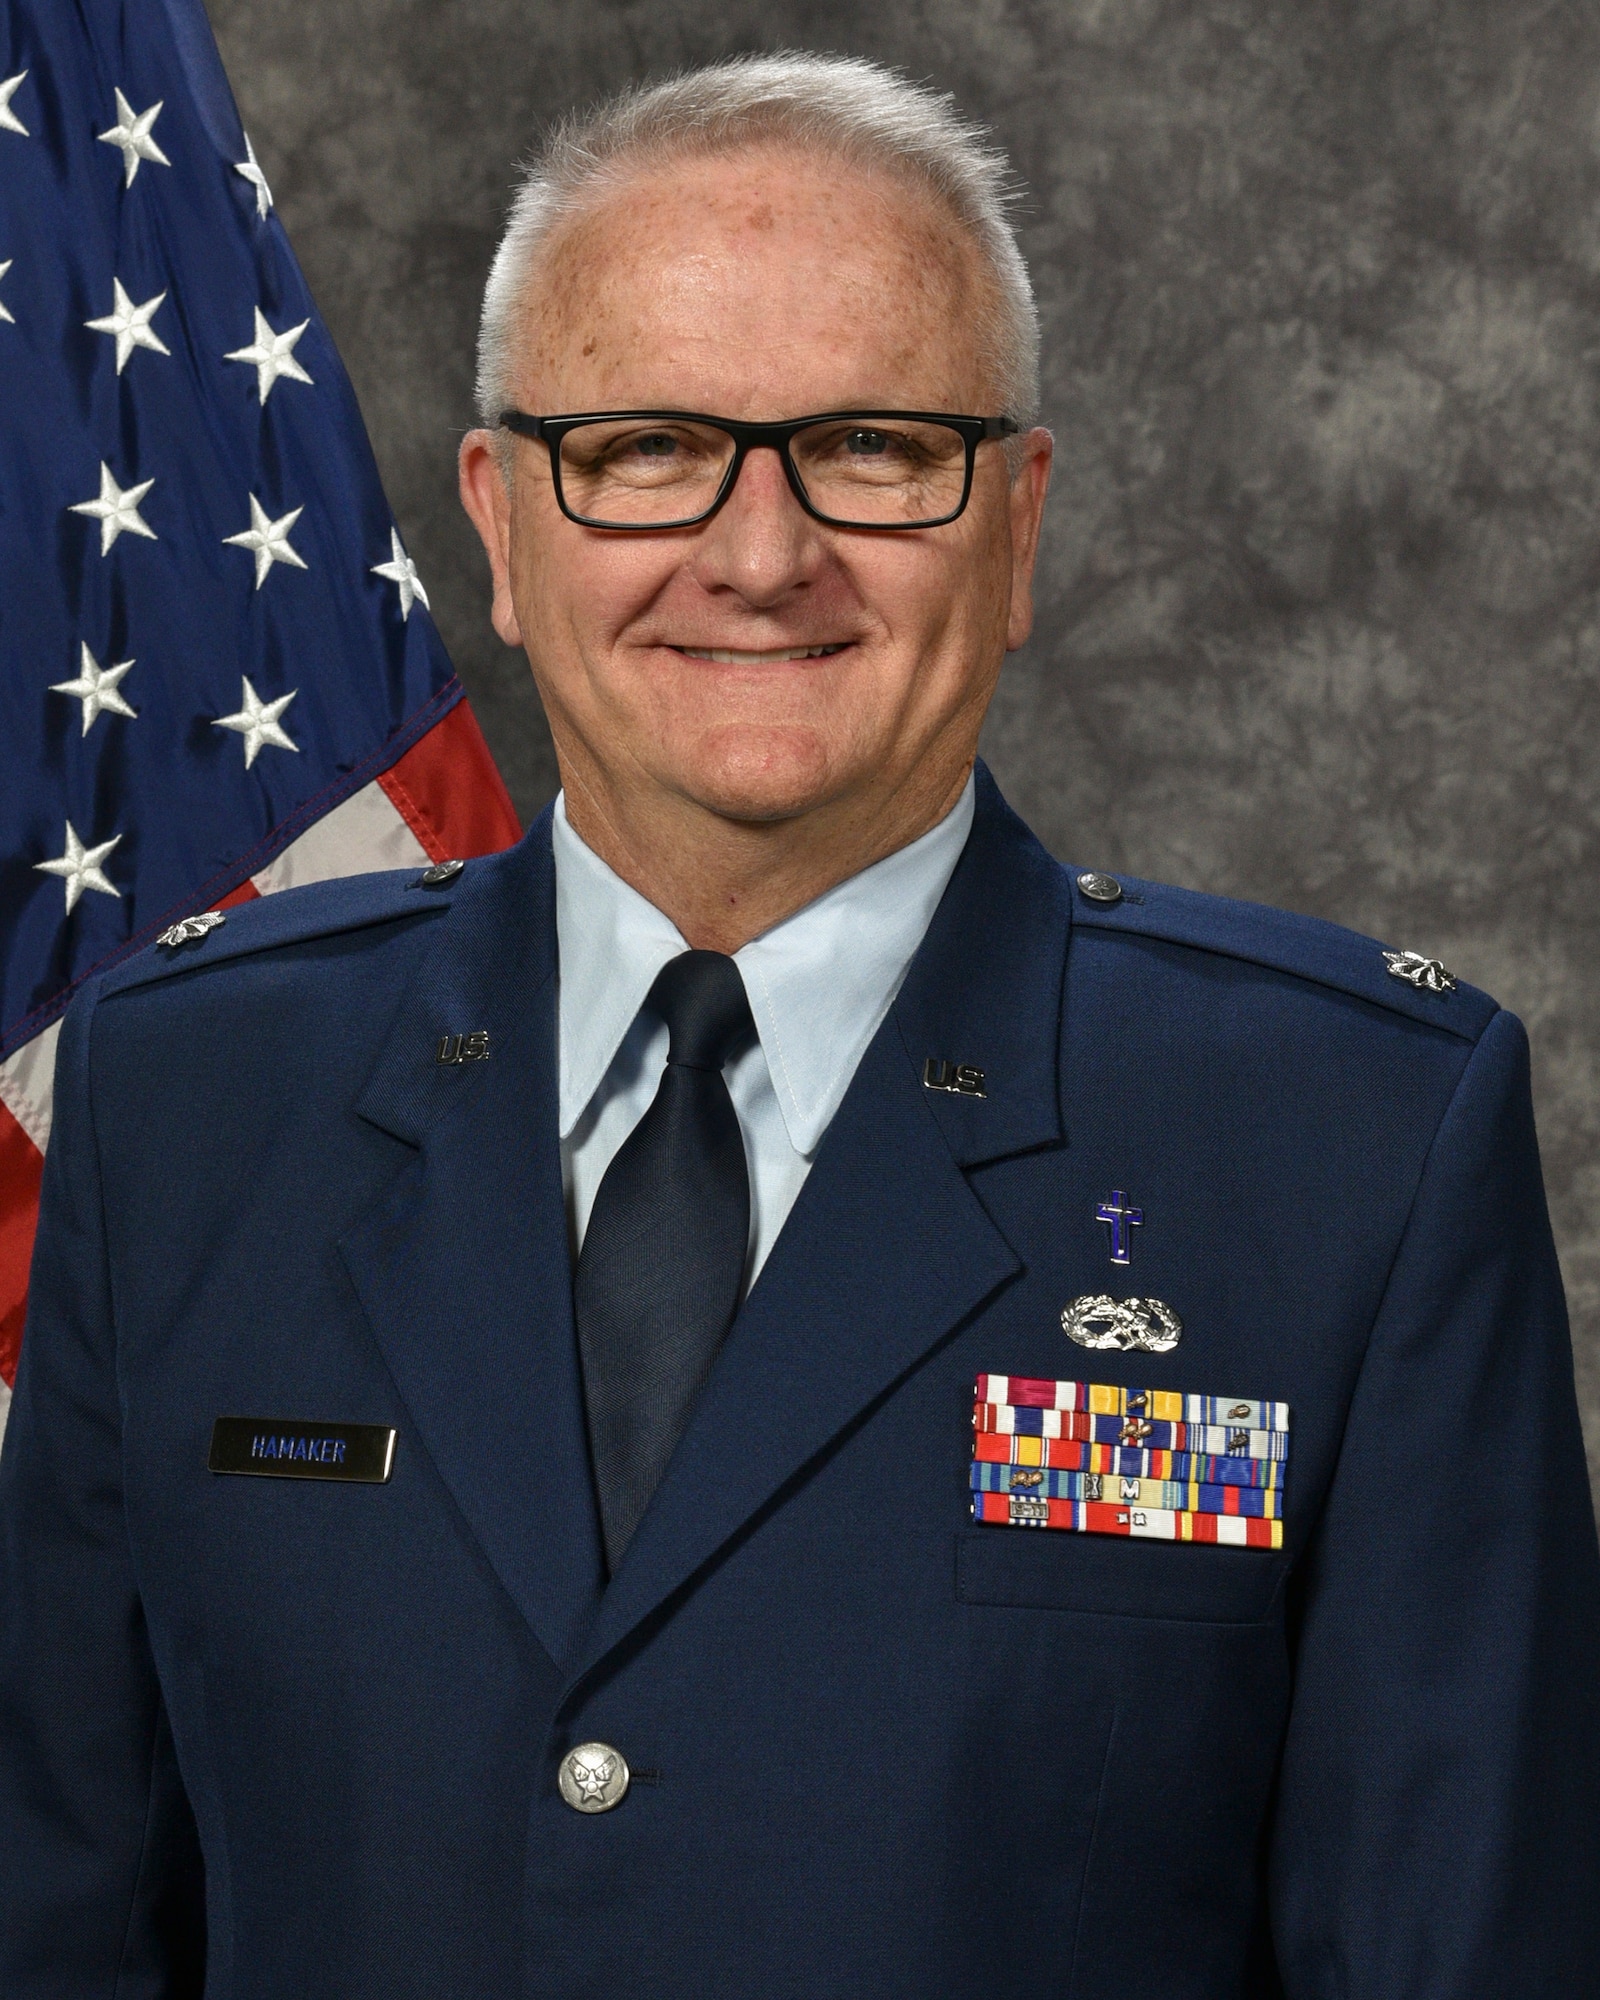 Lt. Col. Daryl R. Hamaker Official Photo